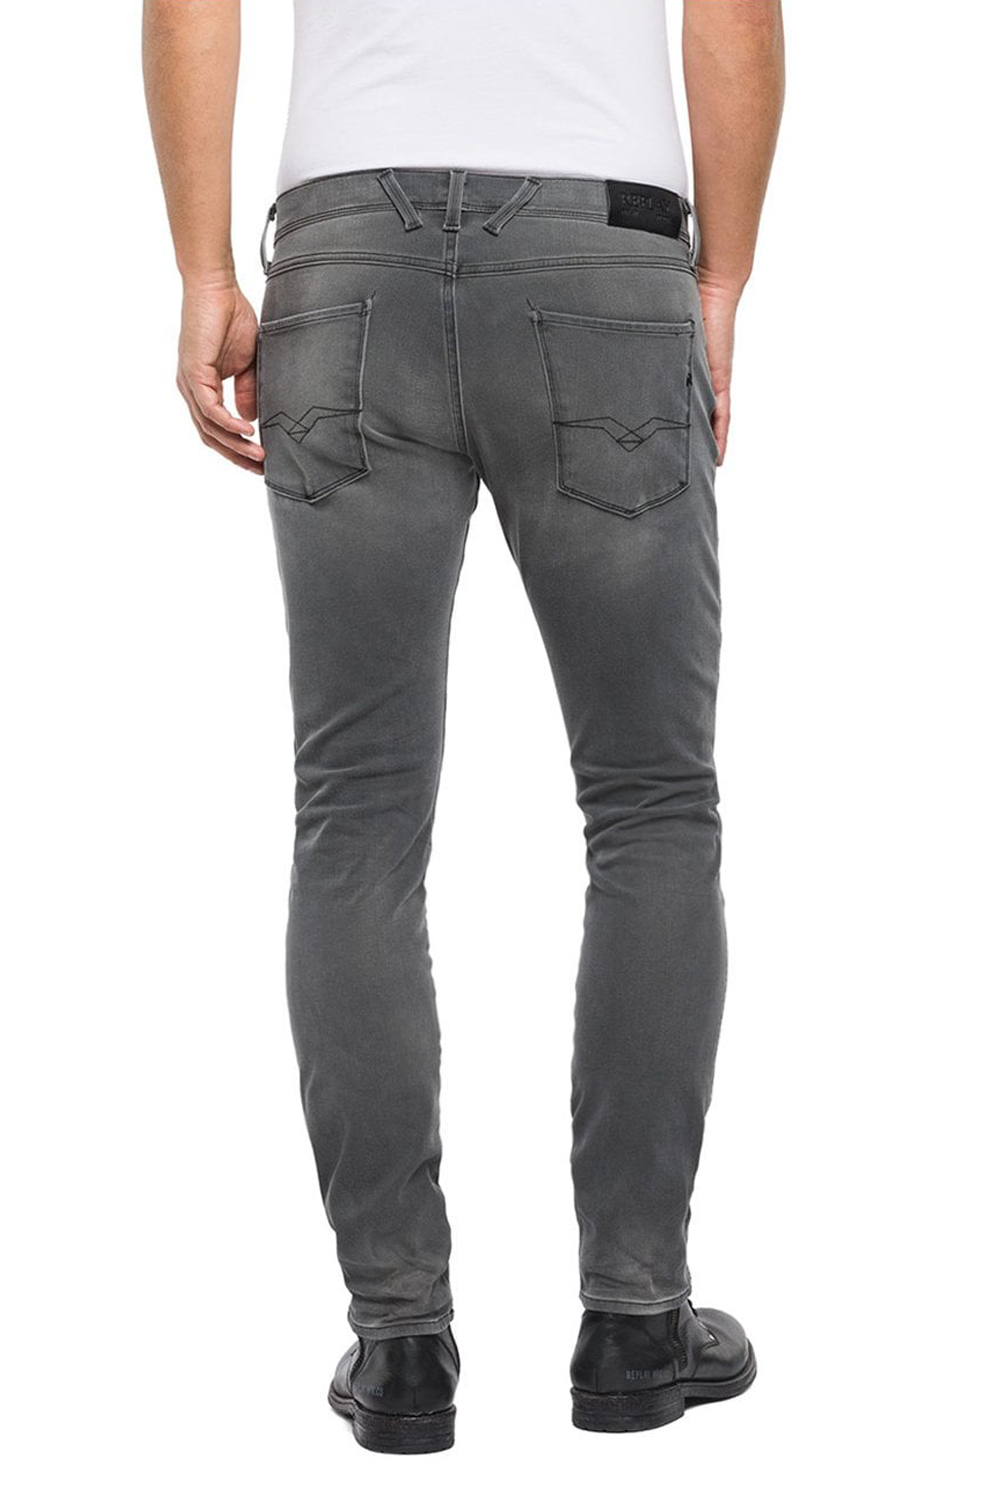 Buy the Replay Hyperflex Jeans Grey at Intro. Spend £50 for free UK delivery. Official stockists. We ship worldwide.